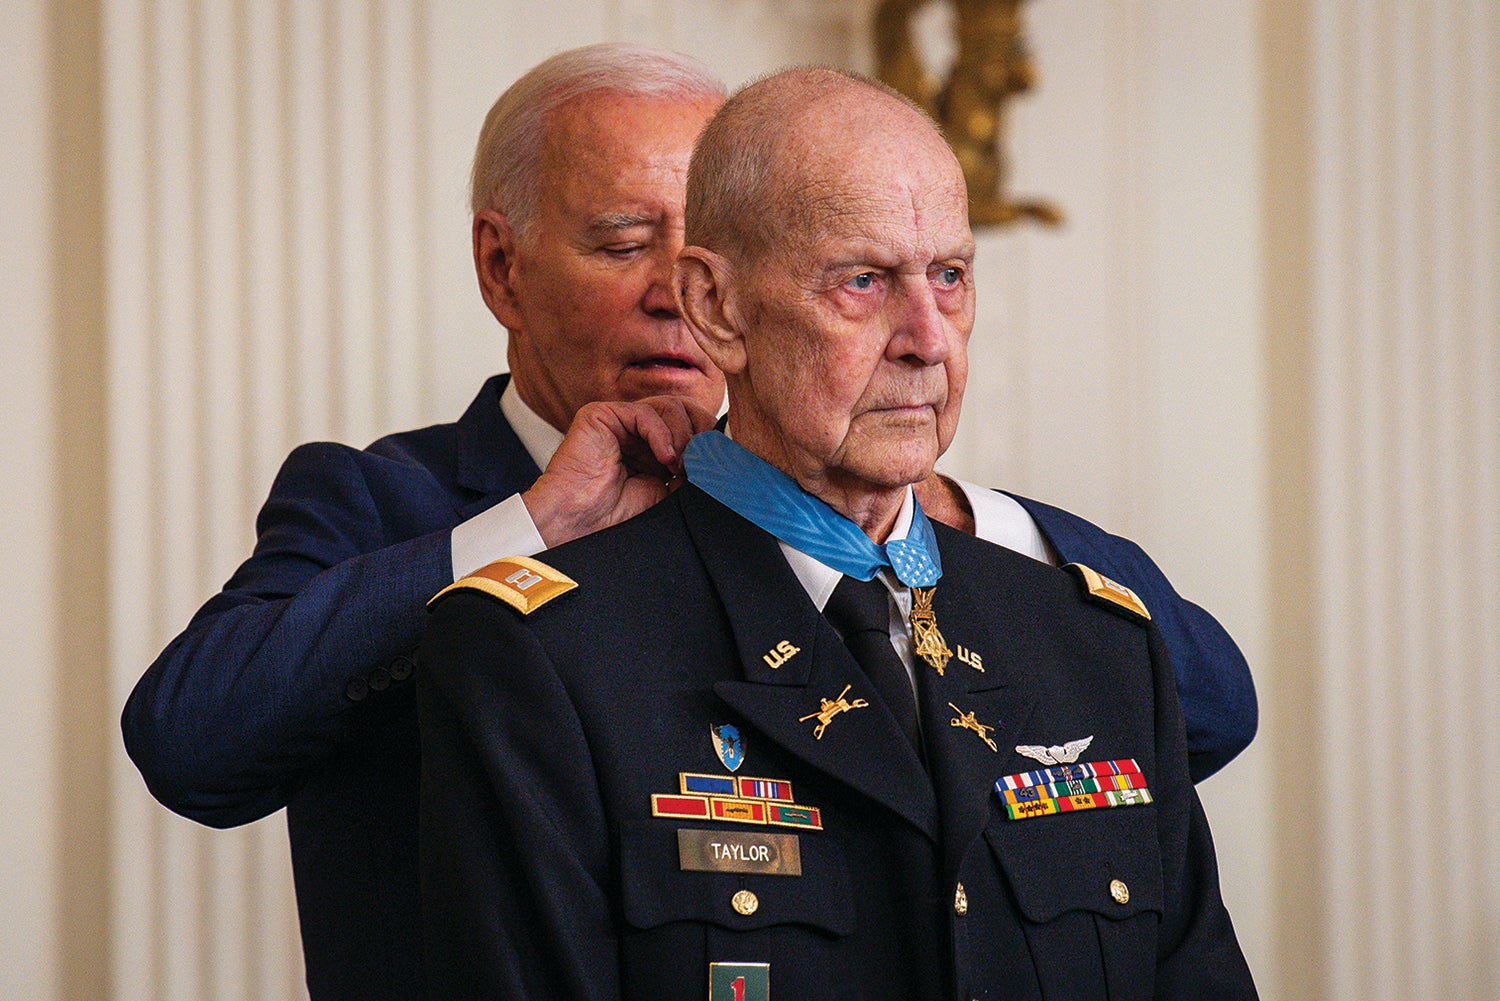 Former Capt. Taylor receives the Medal of Honor from President Joe Biden at the White House Sept. 5. (Credit: U.S. Army/Henry Villarama)